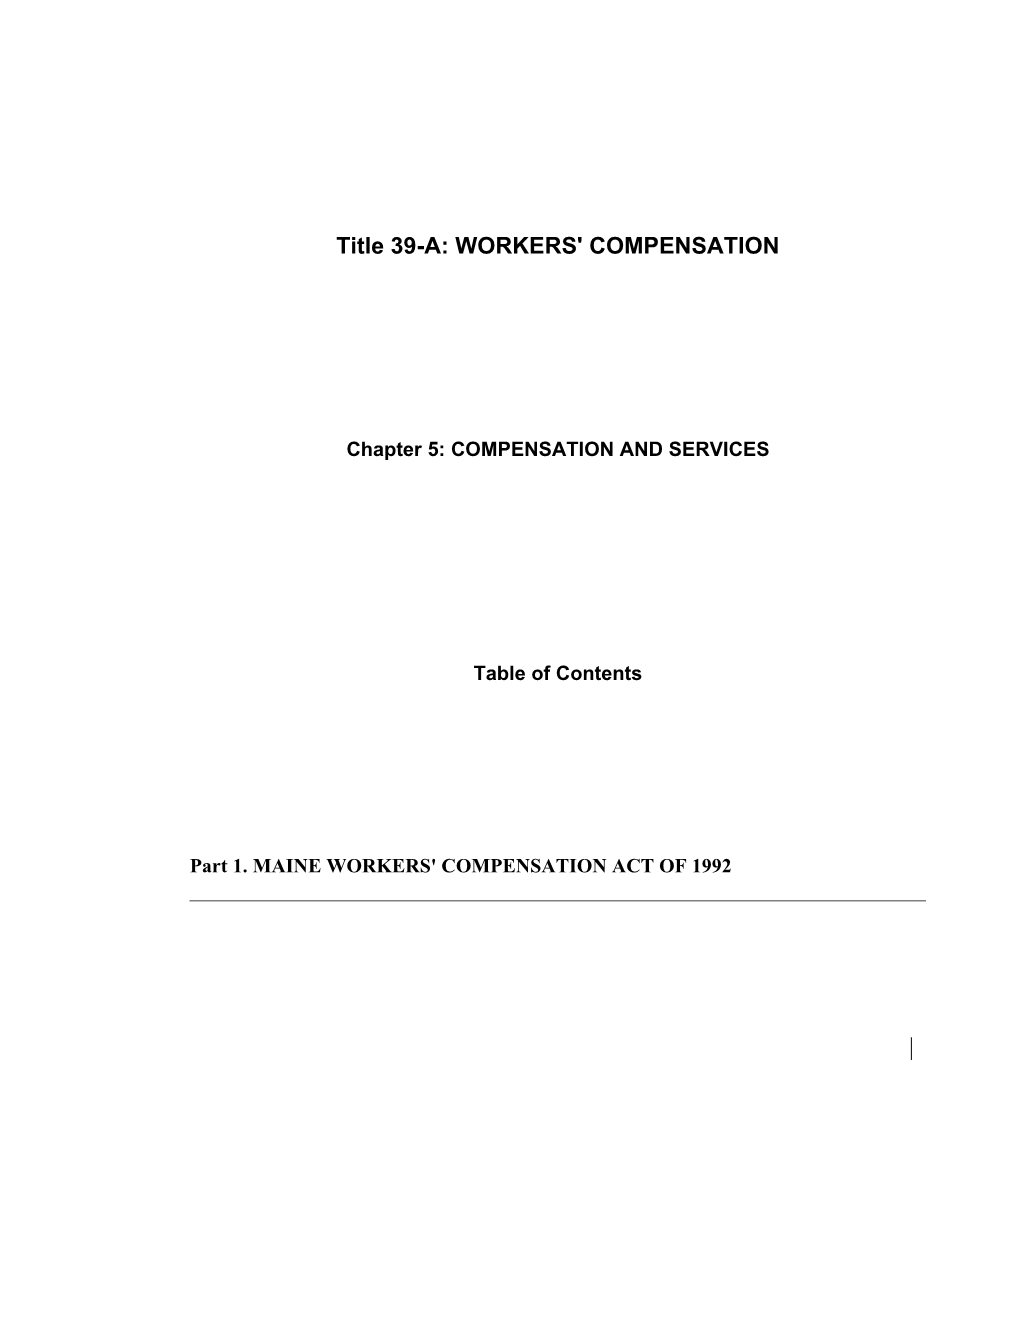 MRS Title 39-A, Chapter5: COMPENSATION and SERVICES